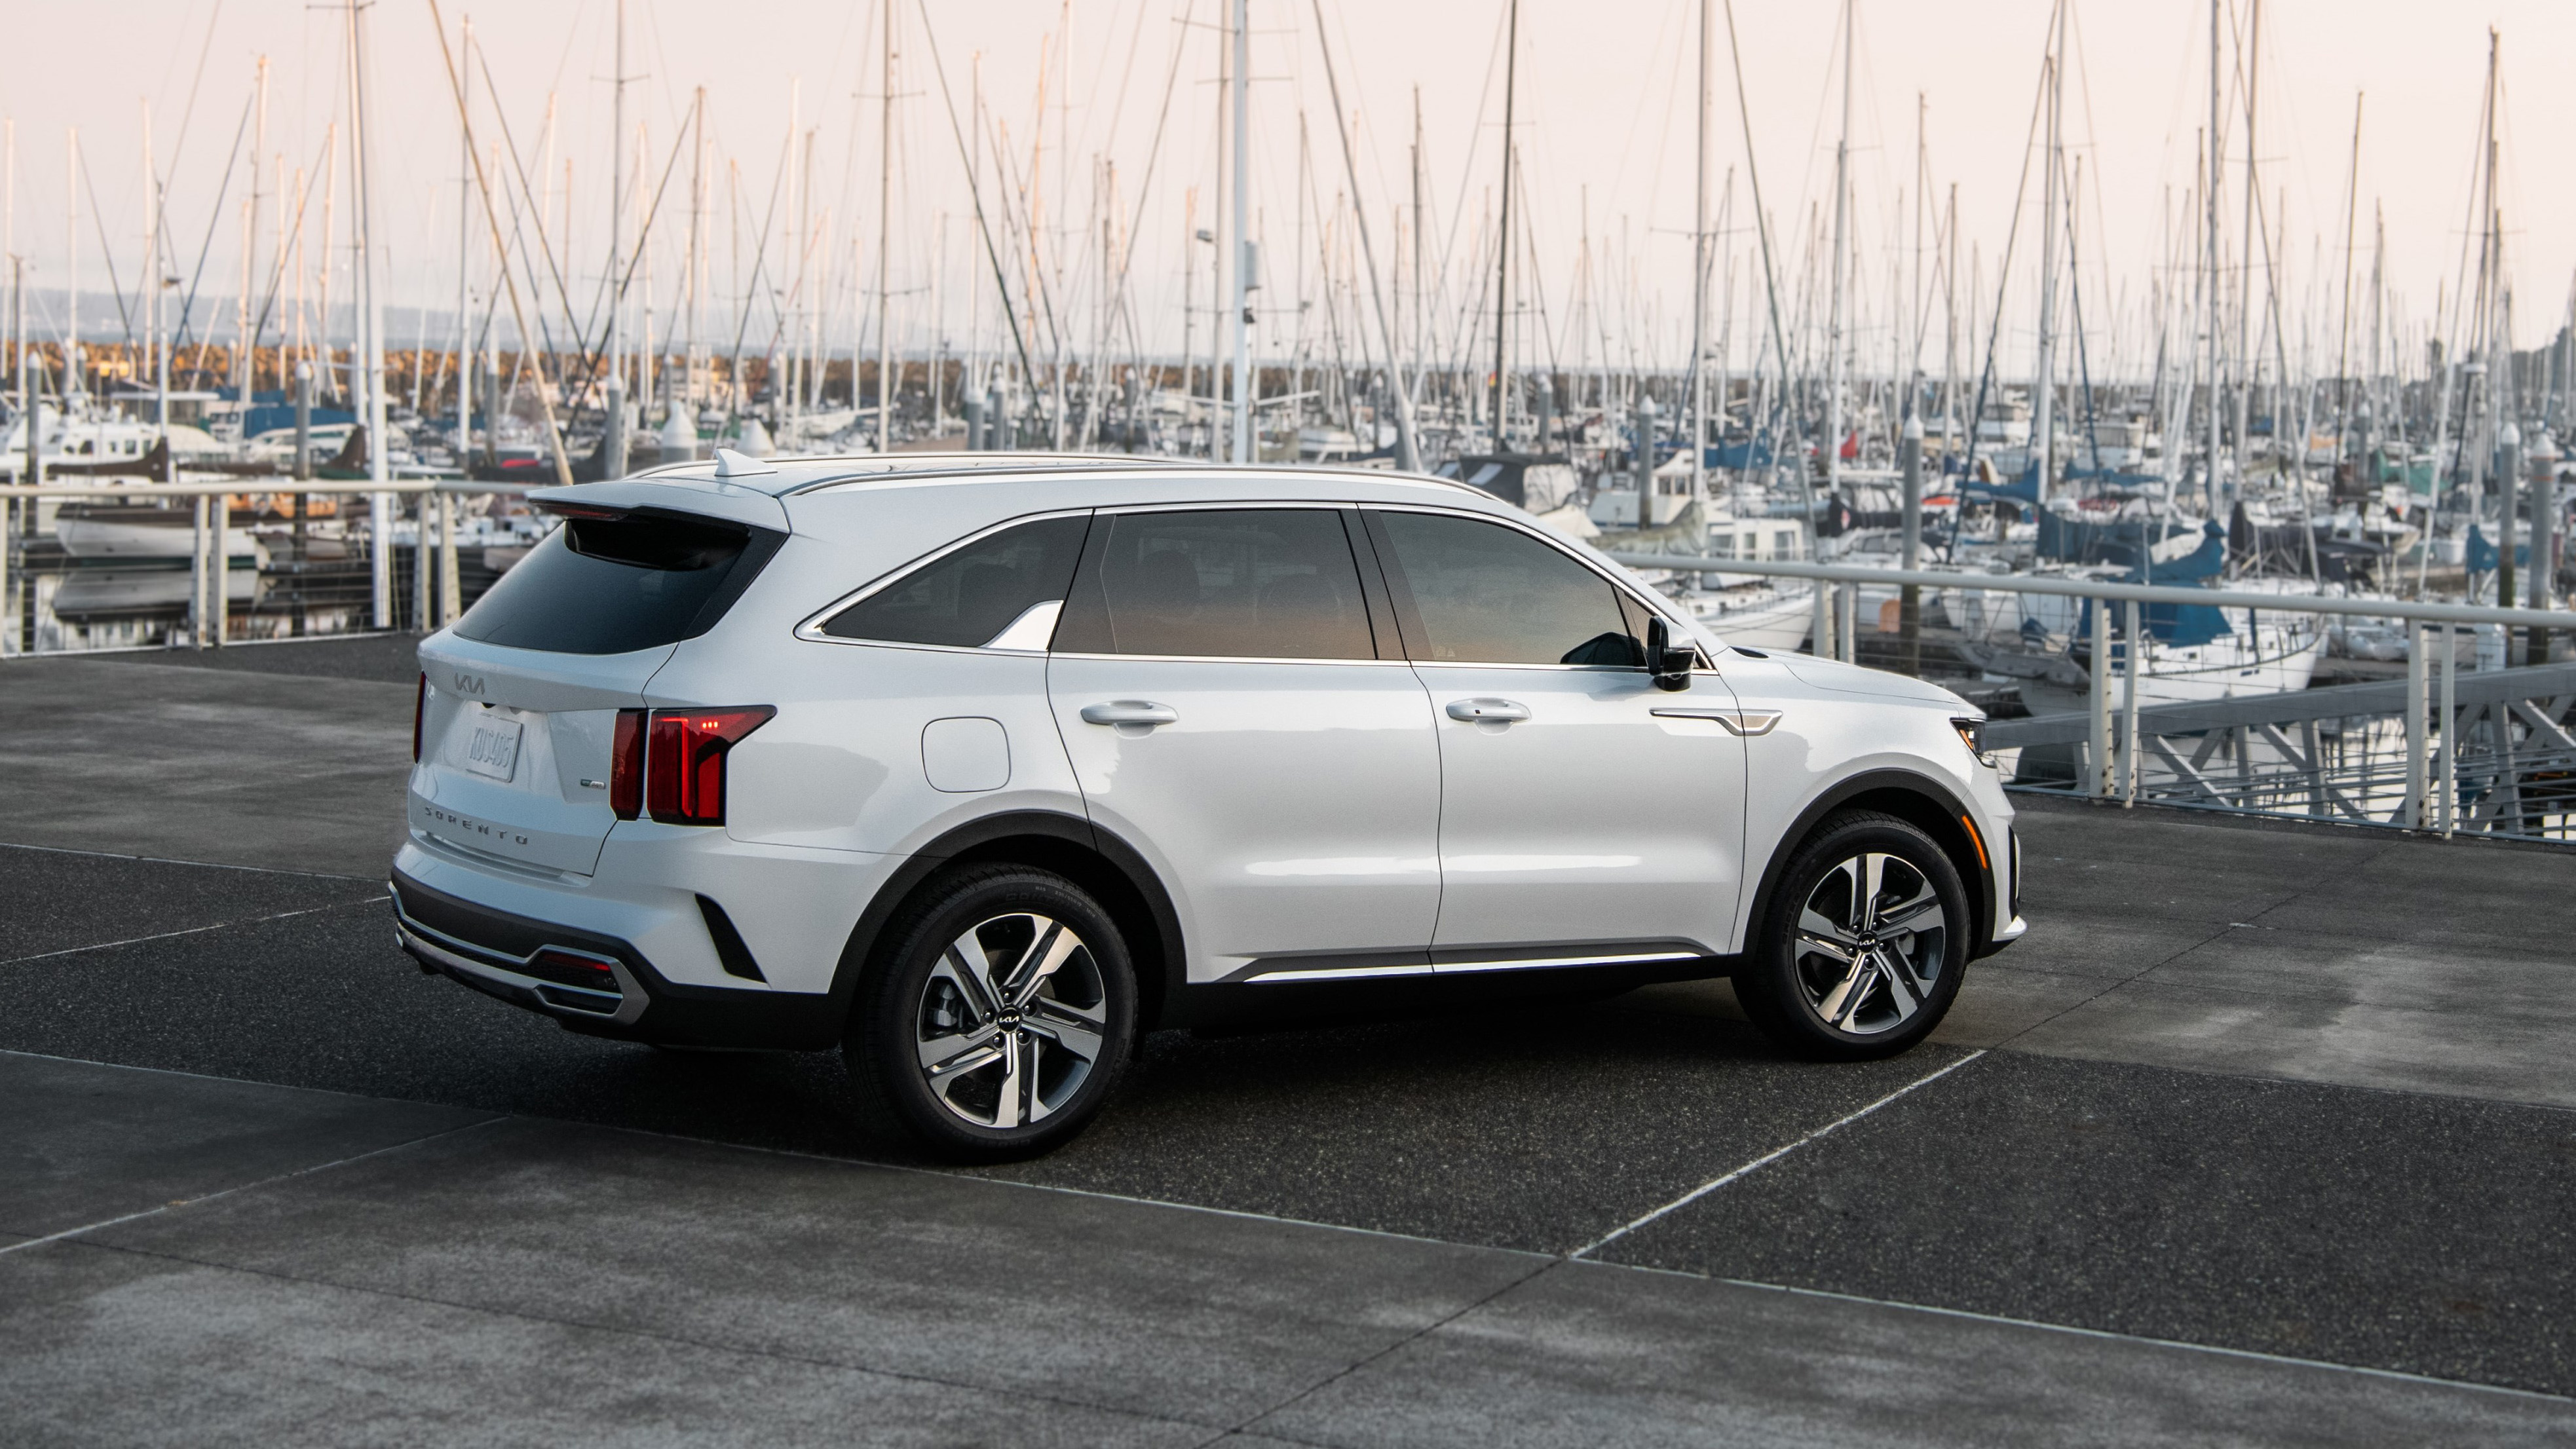 2022 Kia Sorento PHEV Will Be Sold Here Official Specs Revealed 